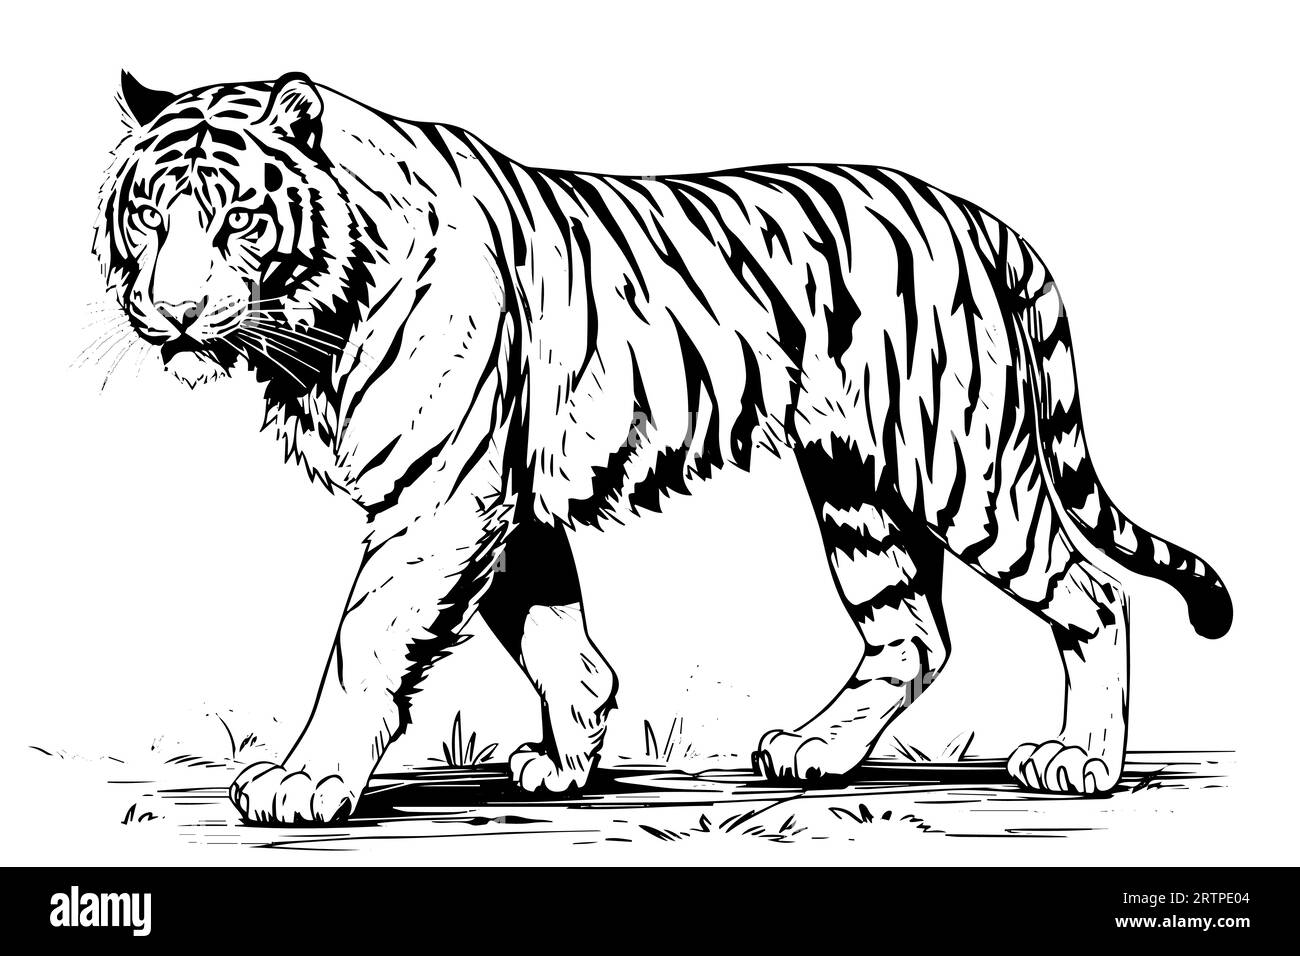 Hand drawn engraving style sketch of a tiger, vector ink illustration ...